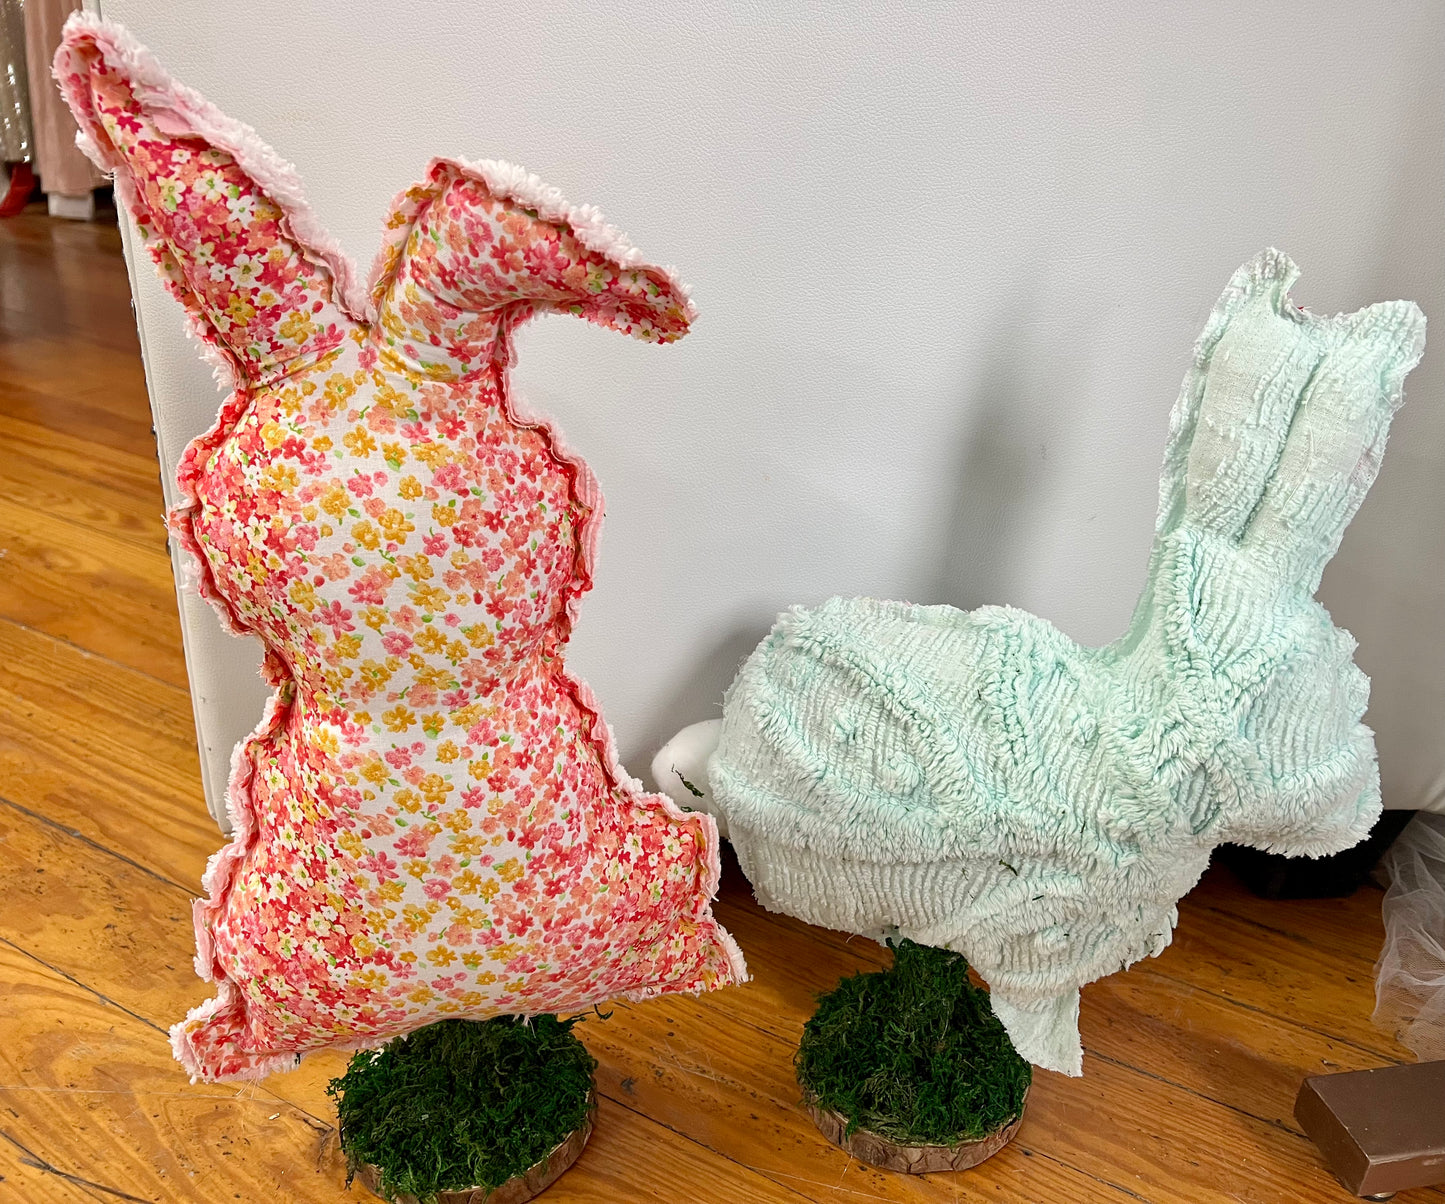 Floral Fabric Bunny on Stand